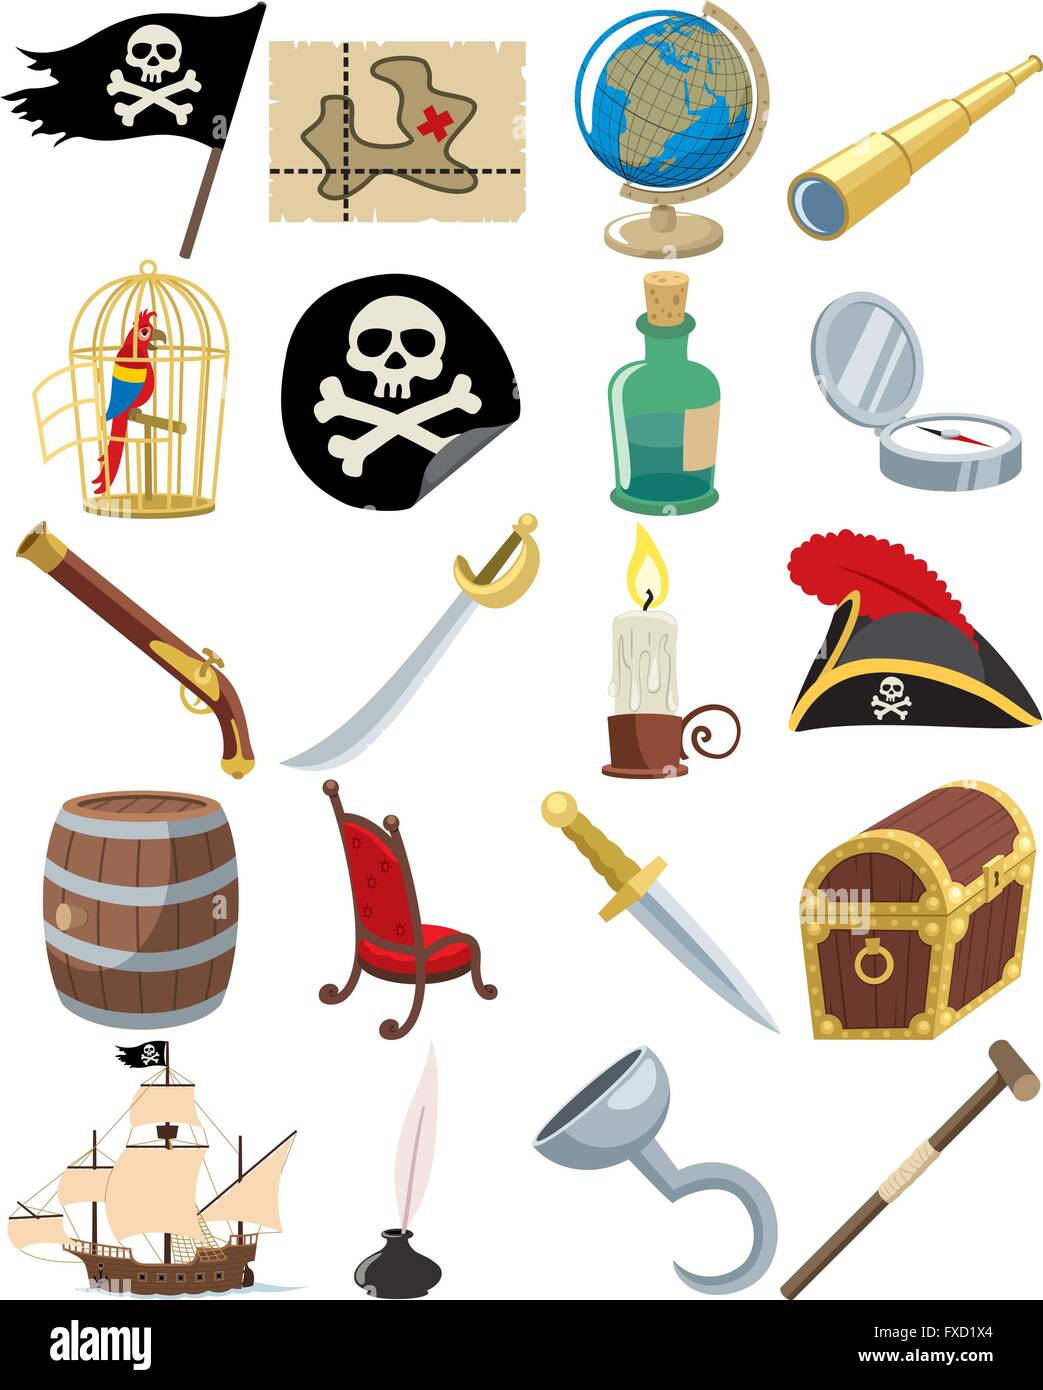 https://c8.alamy.com/comp/FXD1X4/collection-of-20-cartoon-pirate-accessories-FXD1X4.jpg